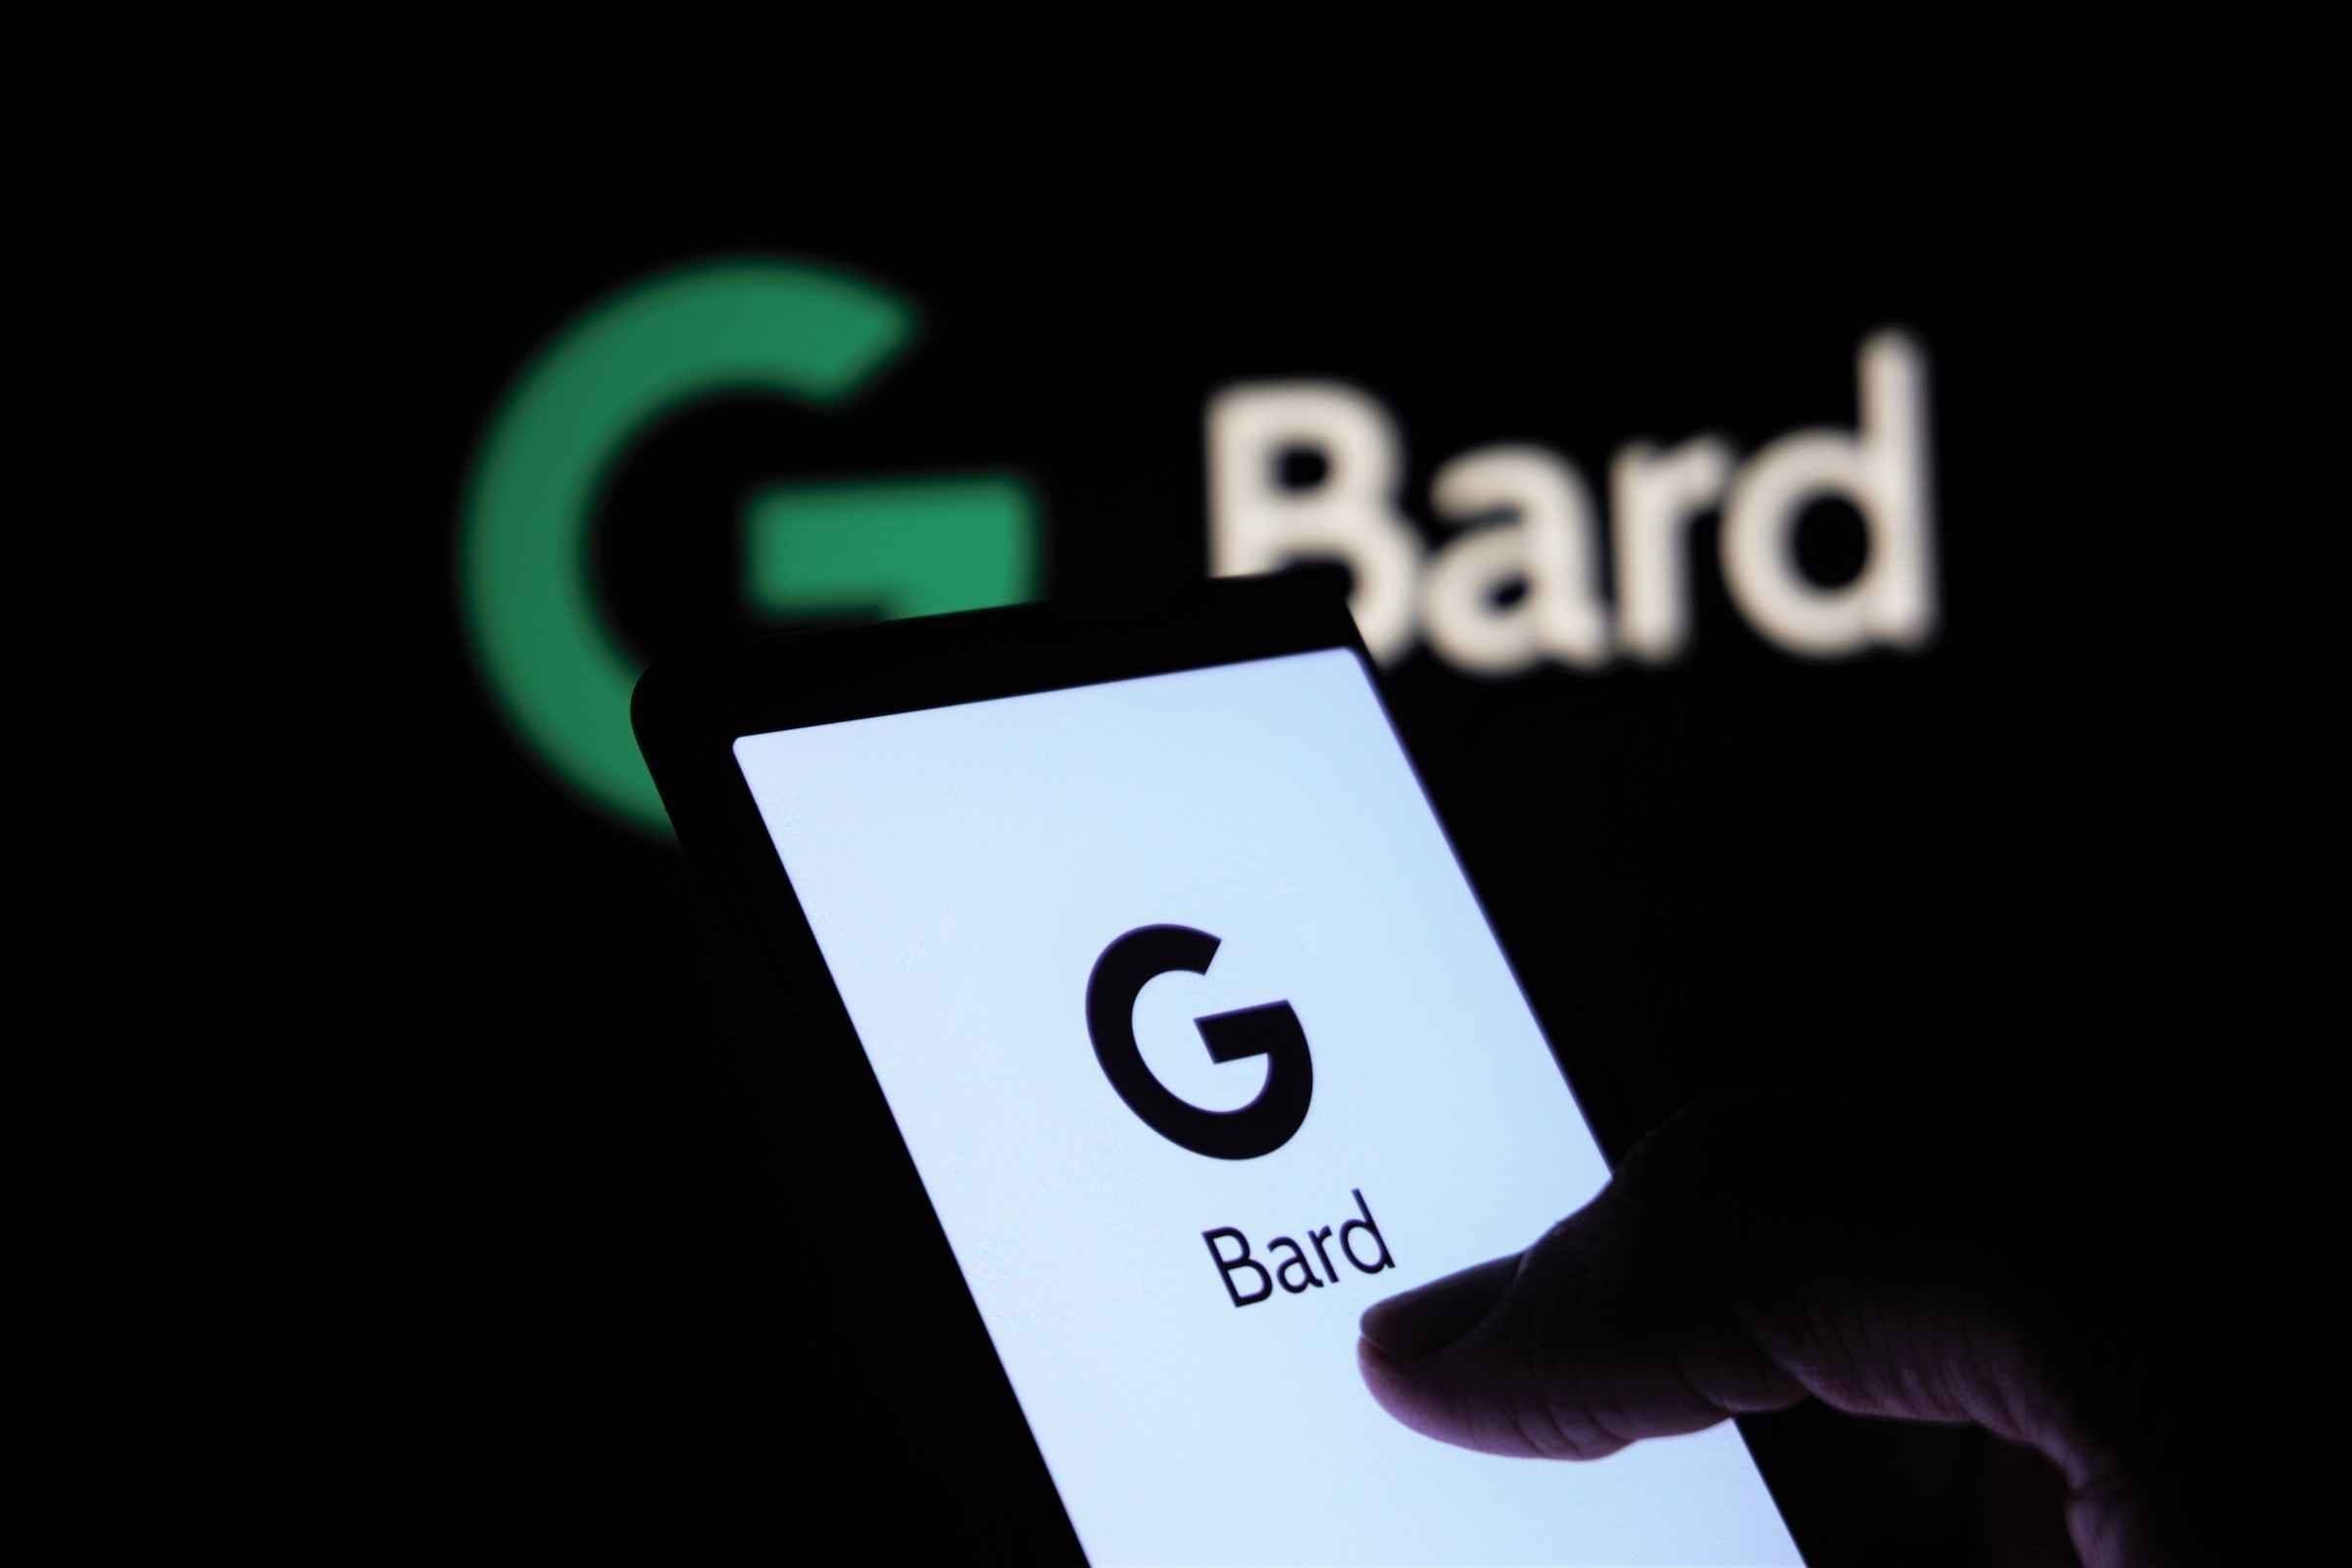 How to use Bard AI for Gmail, YouTube, Google Flights, and more